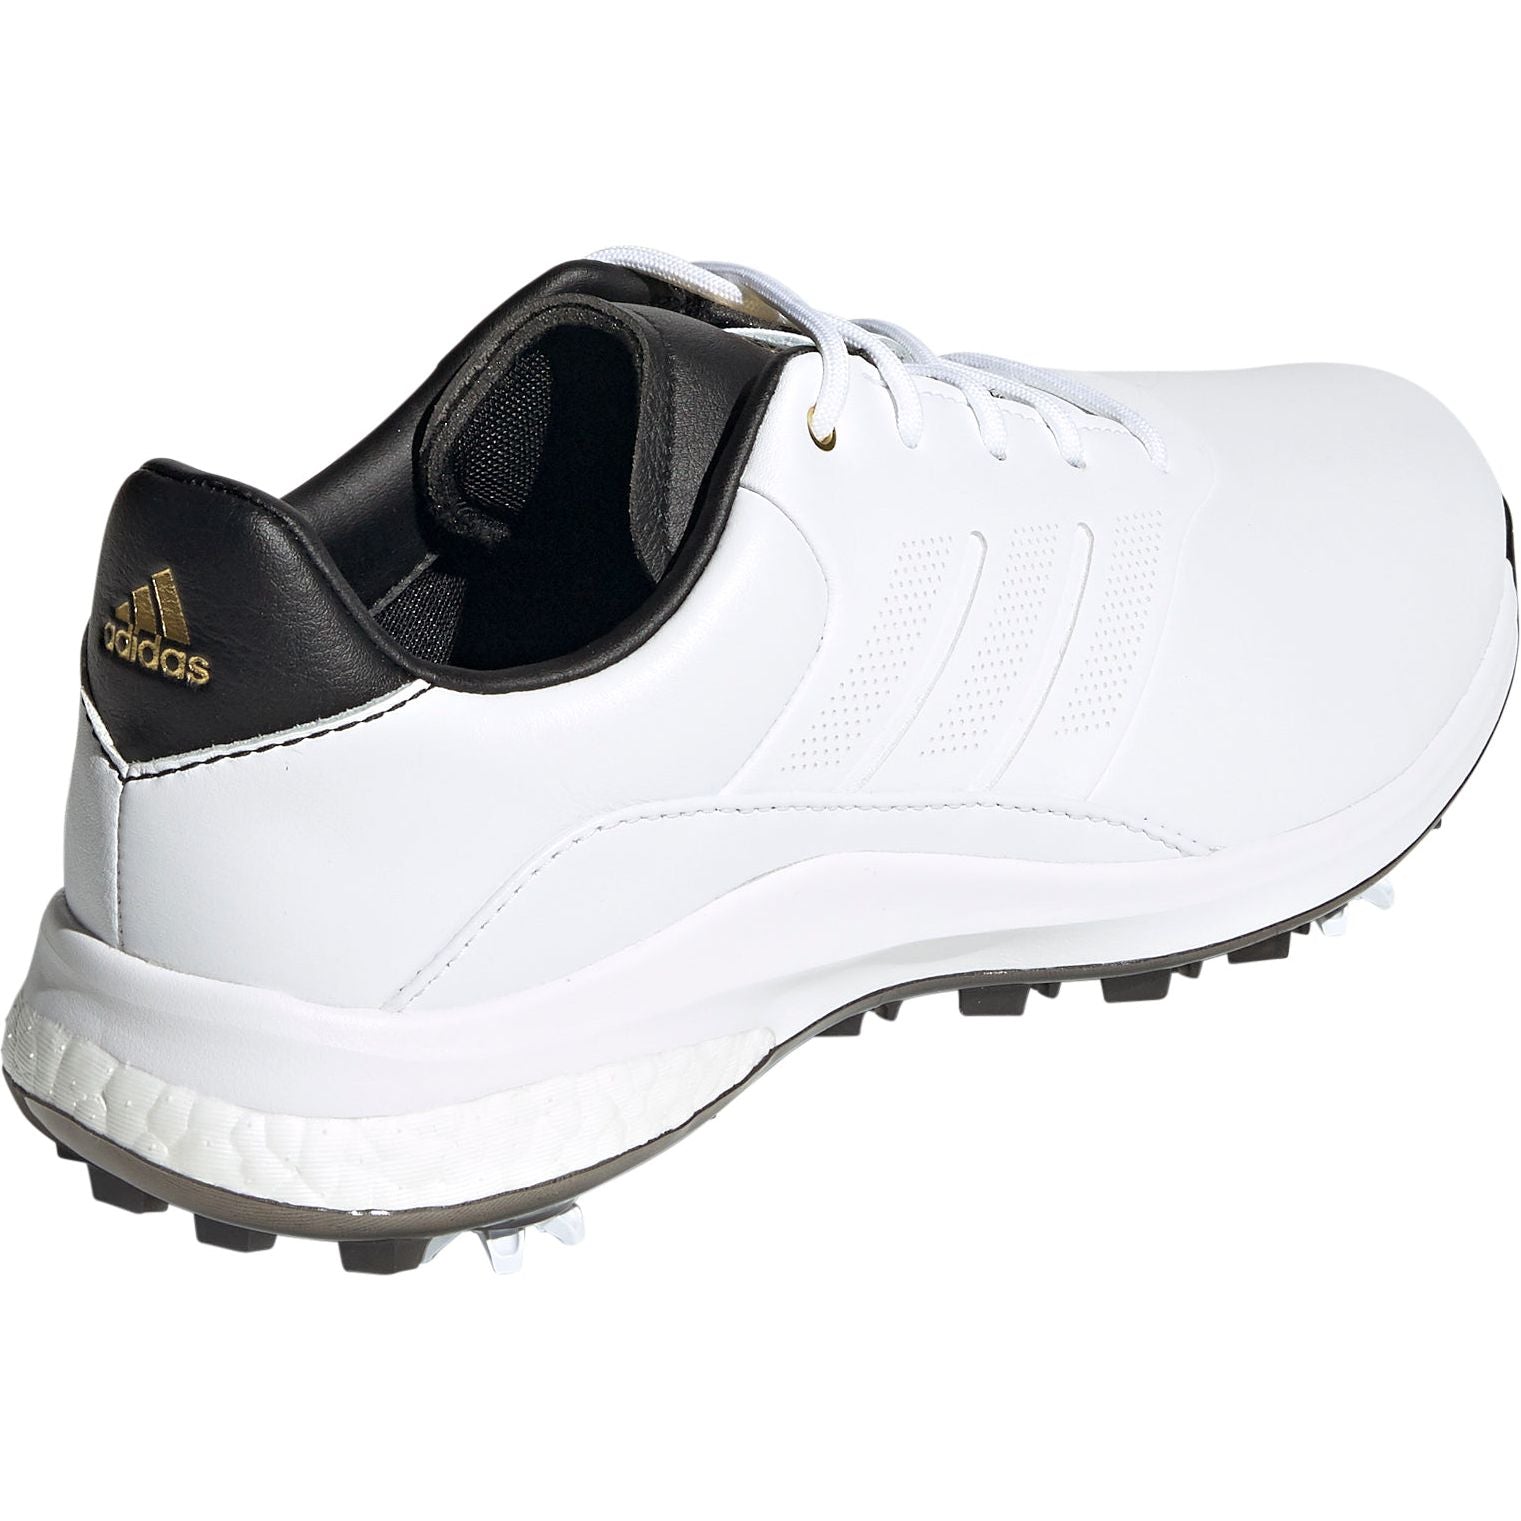 Adidas Performance Classic Golf Shoes Fw6273 Back View